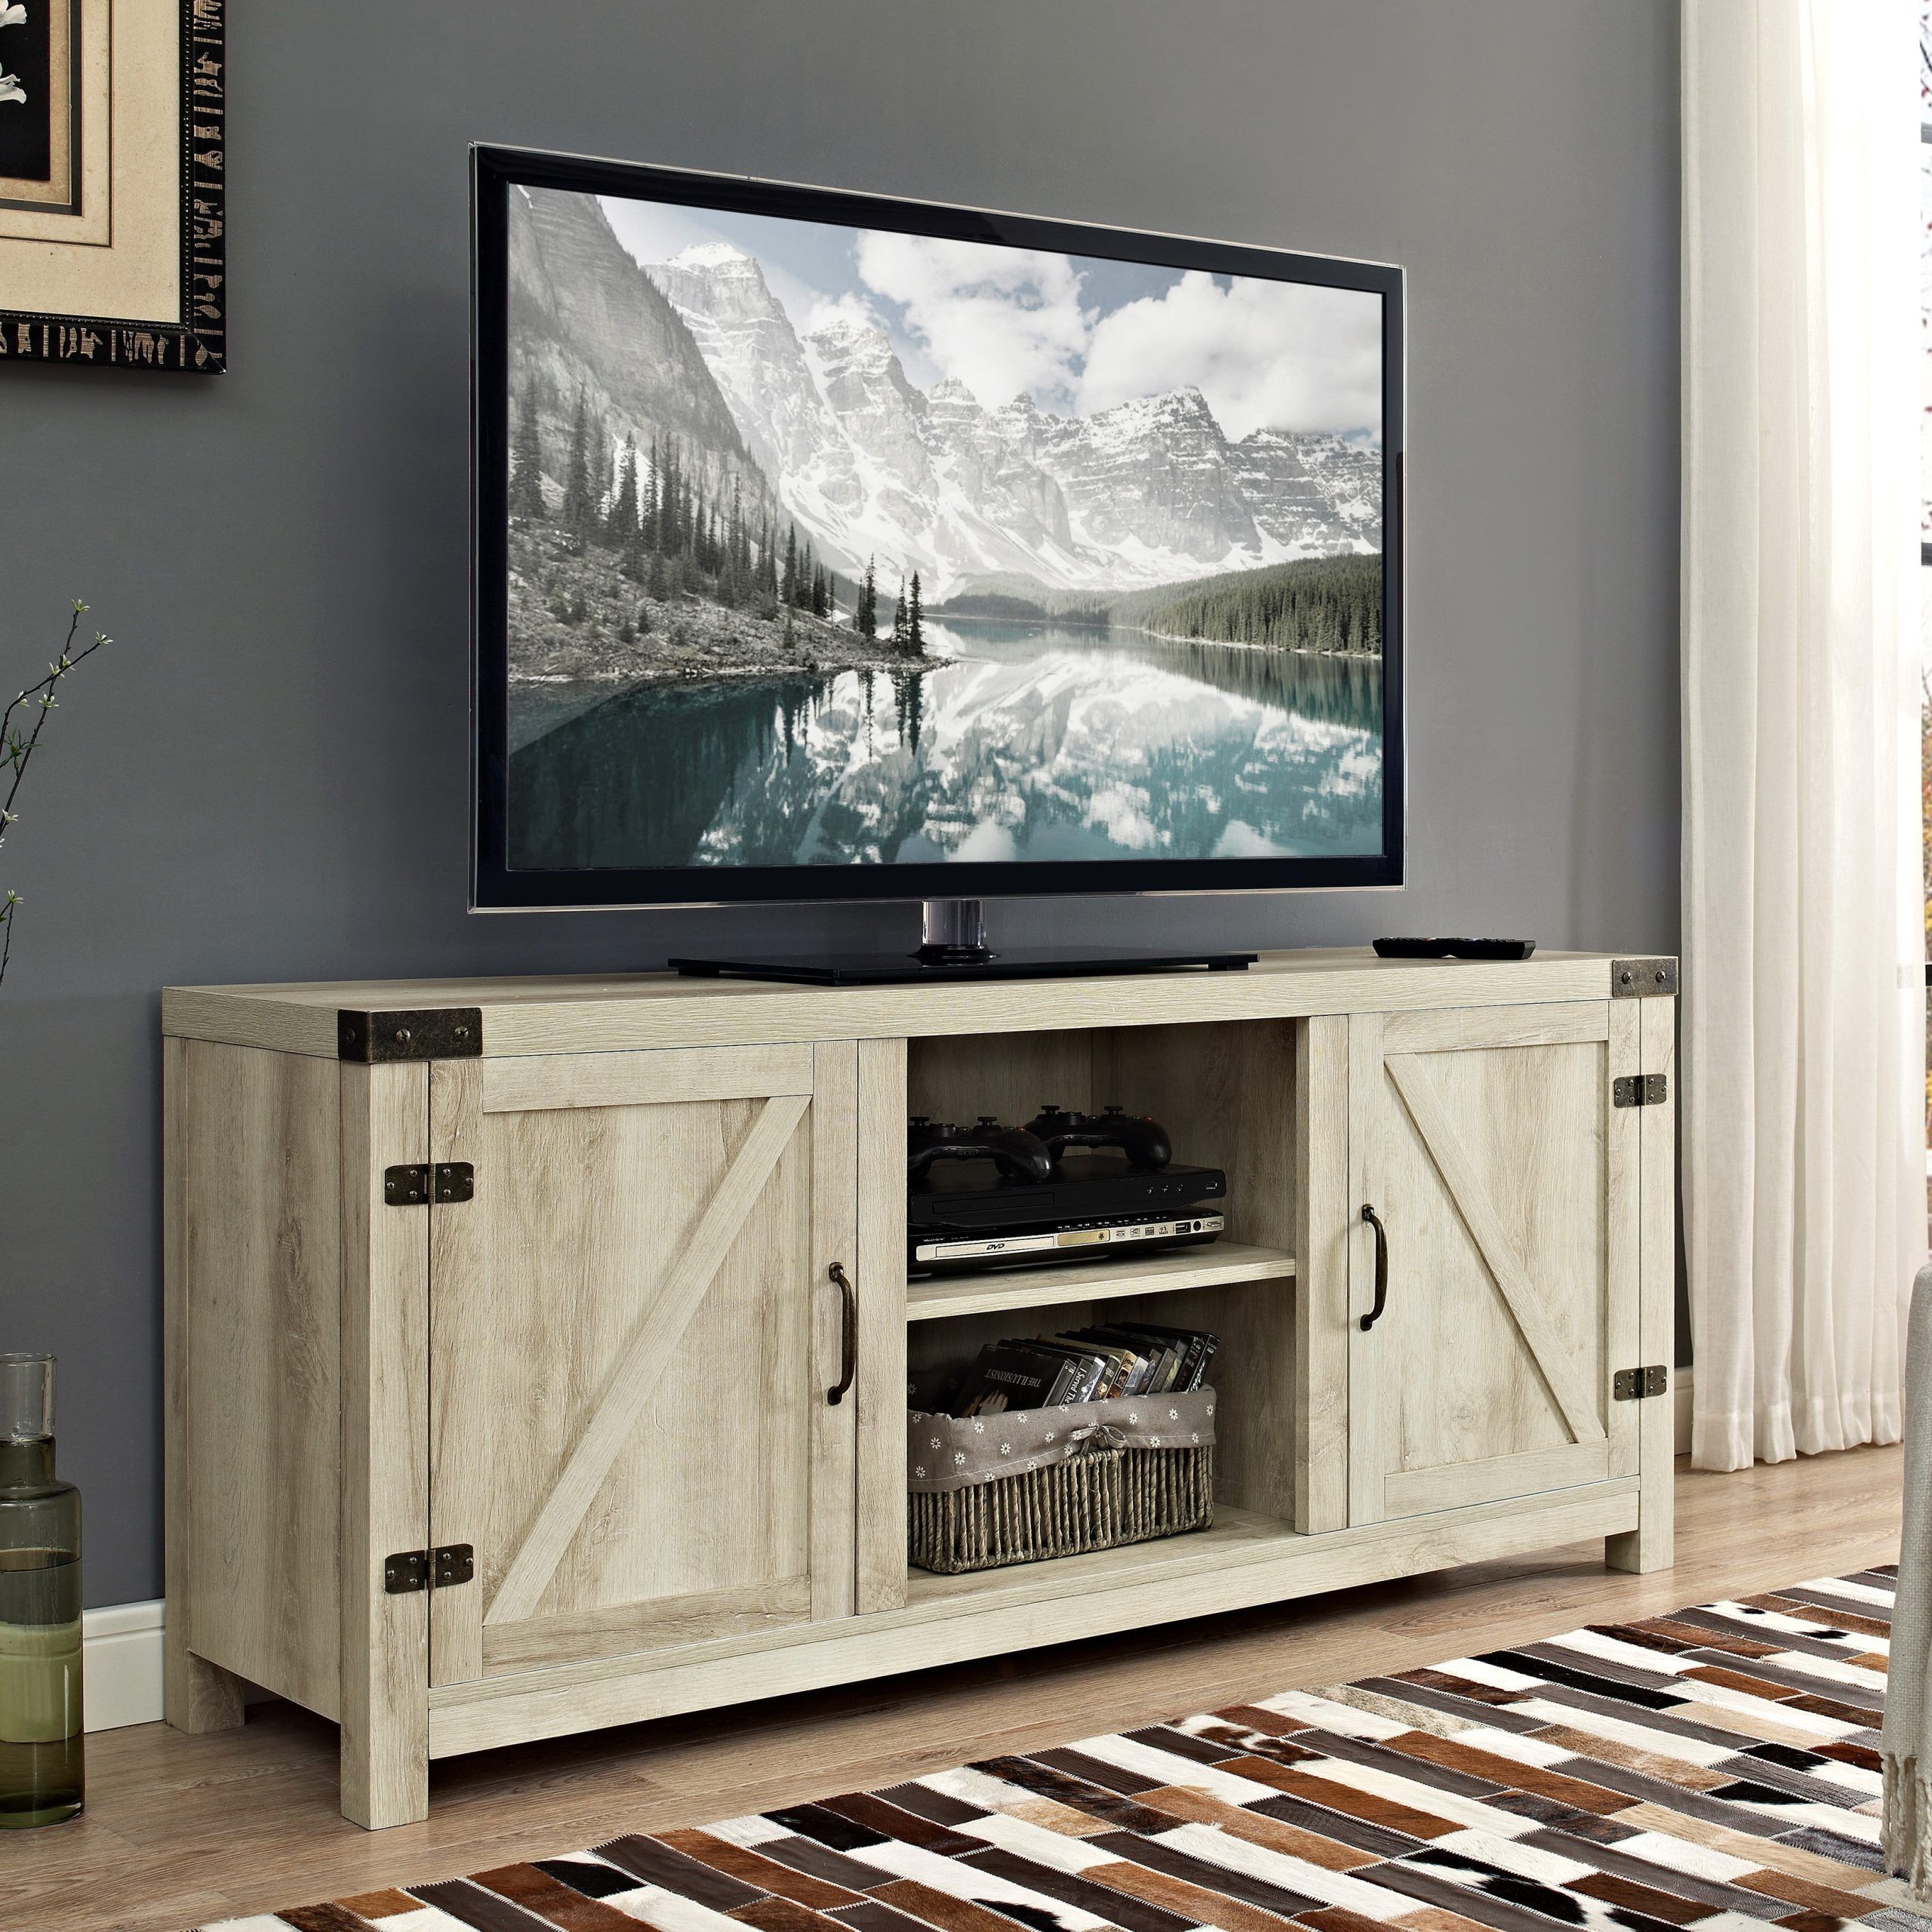 Woven Paths Modern Farmhouse Barn Door Tv Stand For Tvs Up To 65 Inside Barn Door Media Tv Stands (View 13 of 20)